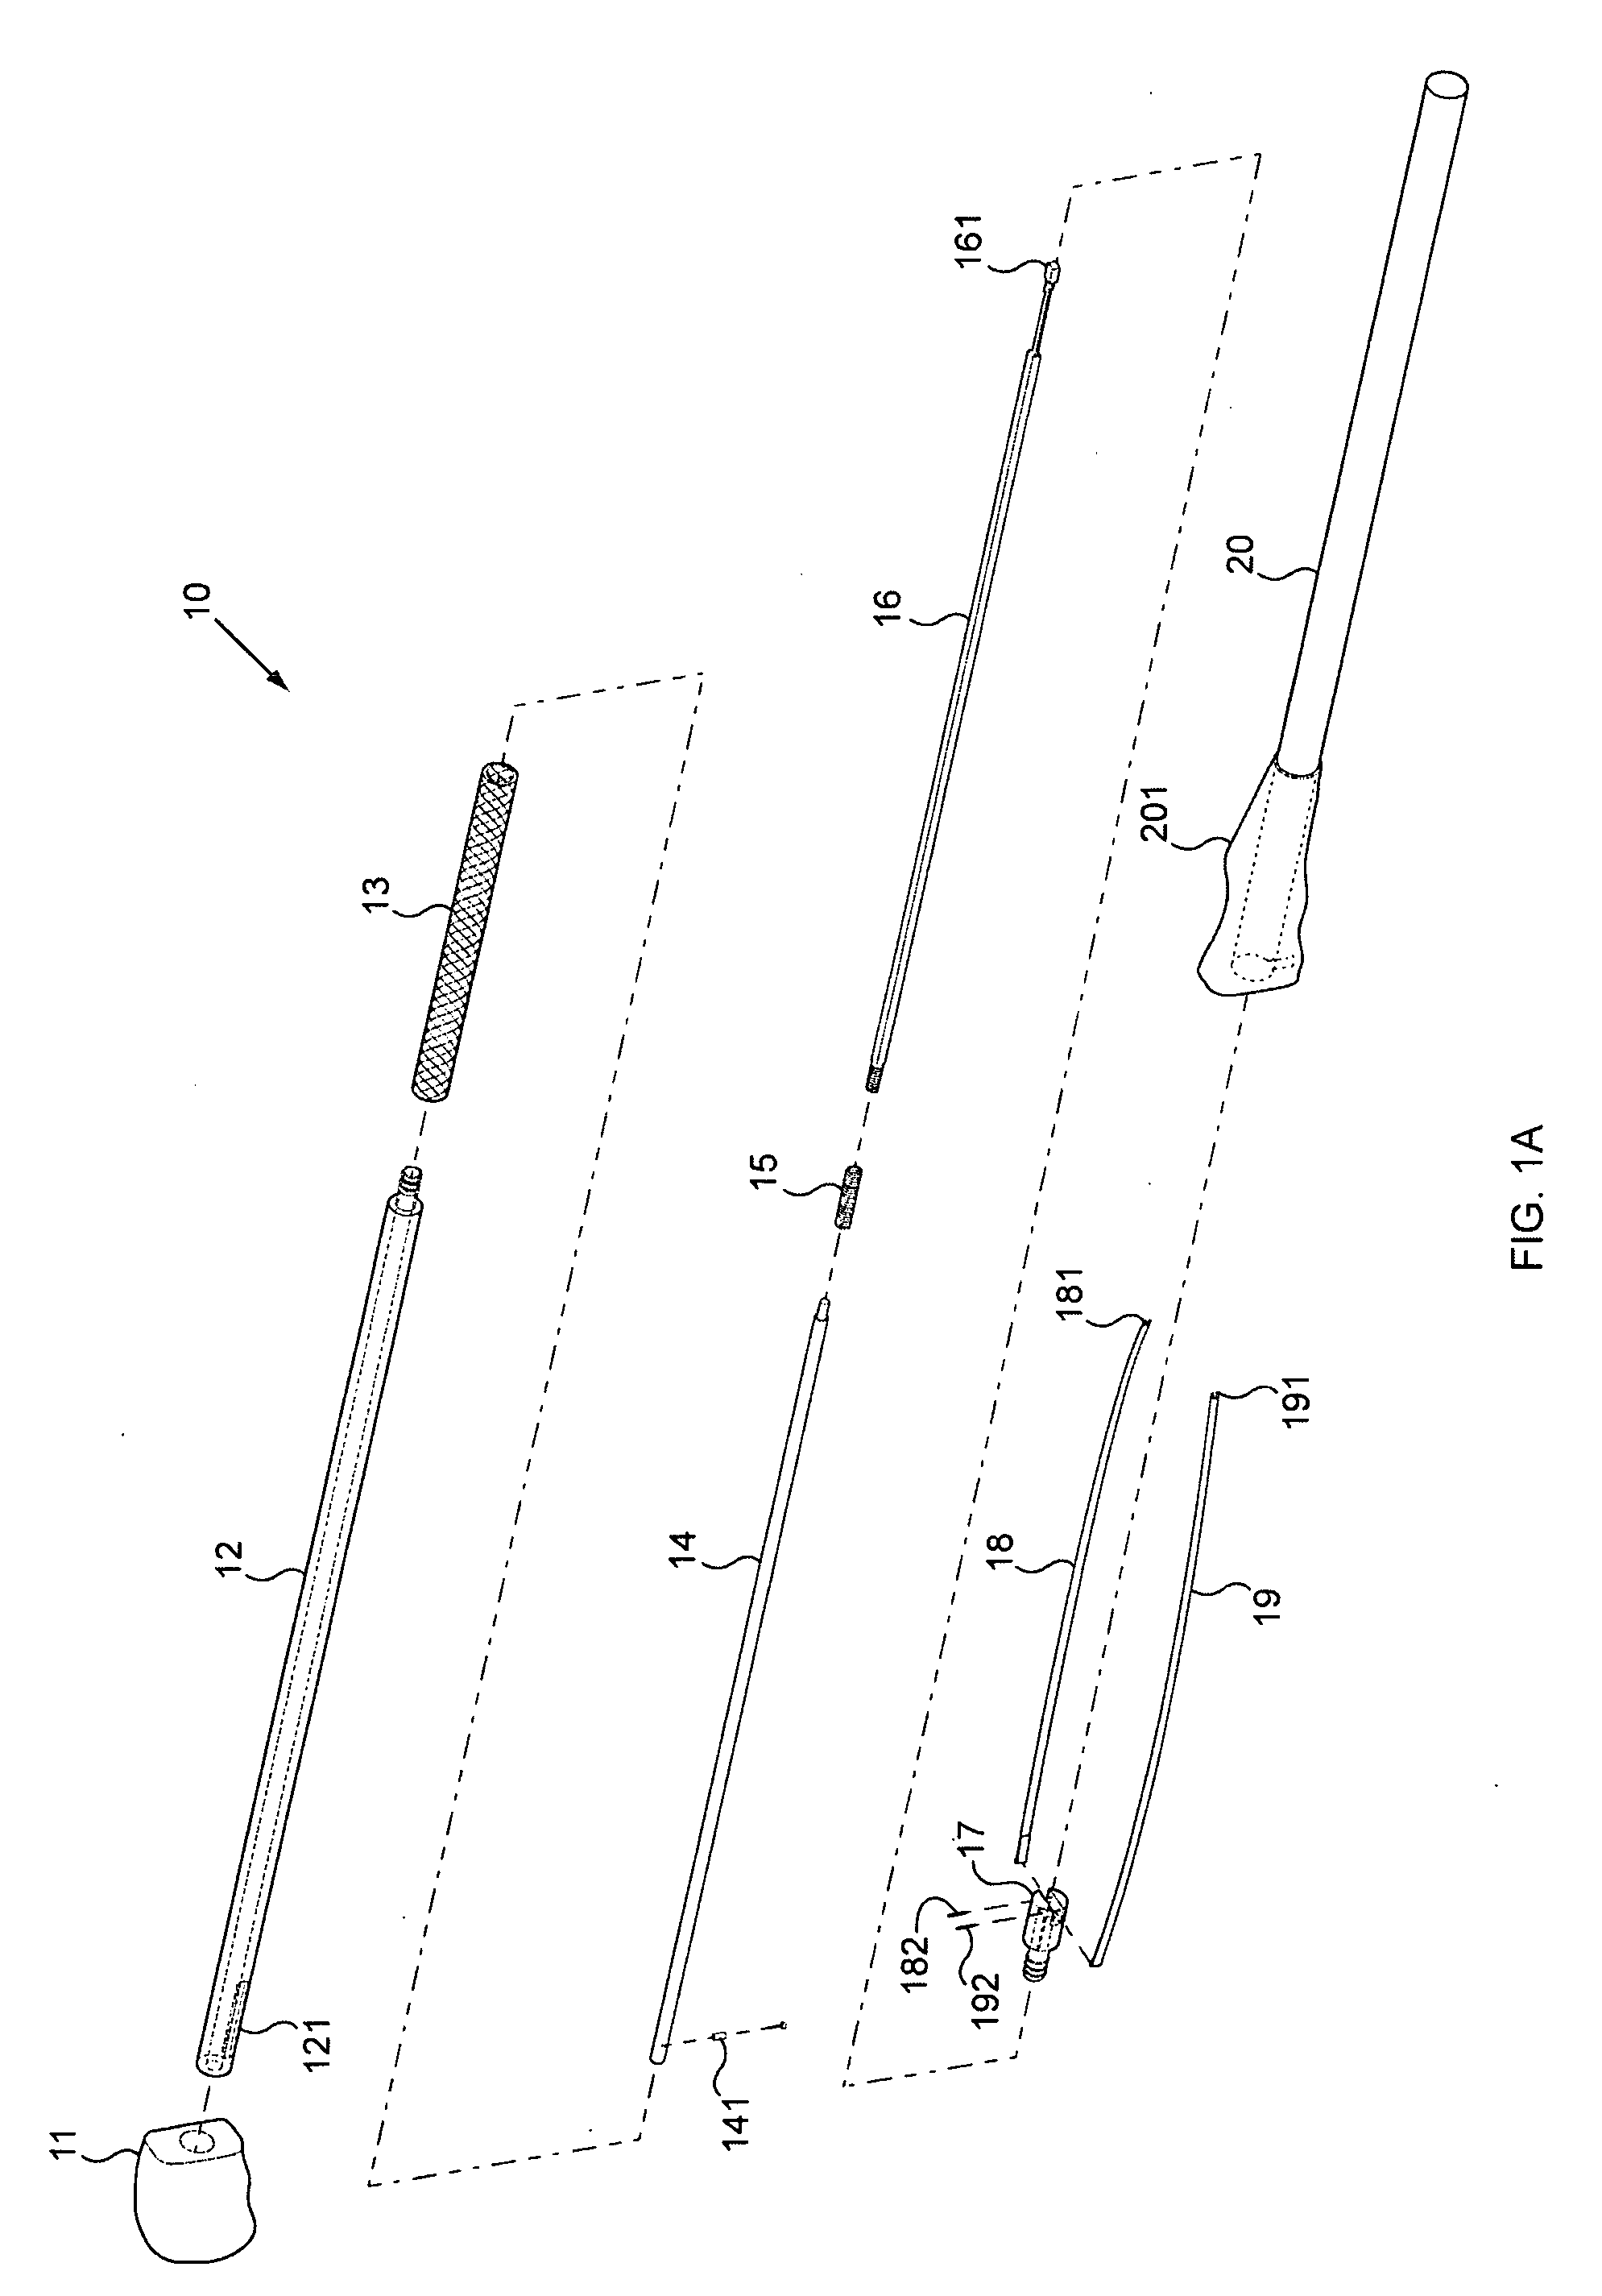 Apparatus, method and system for the deployment of surgical mesh